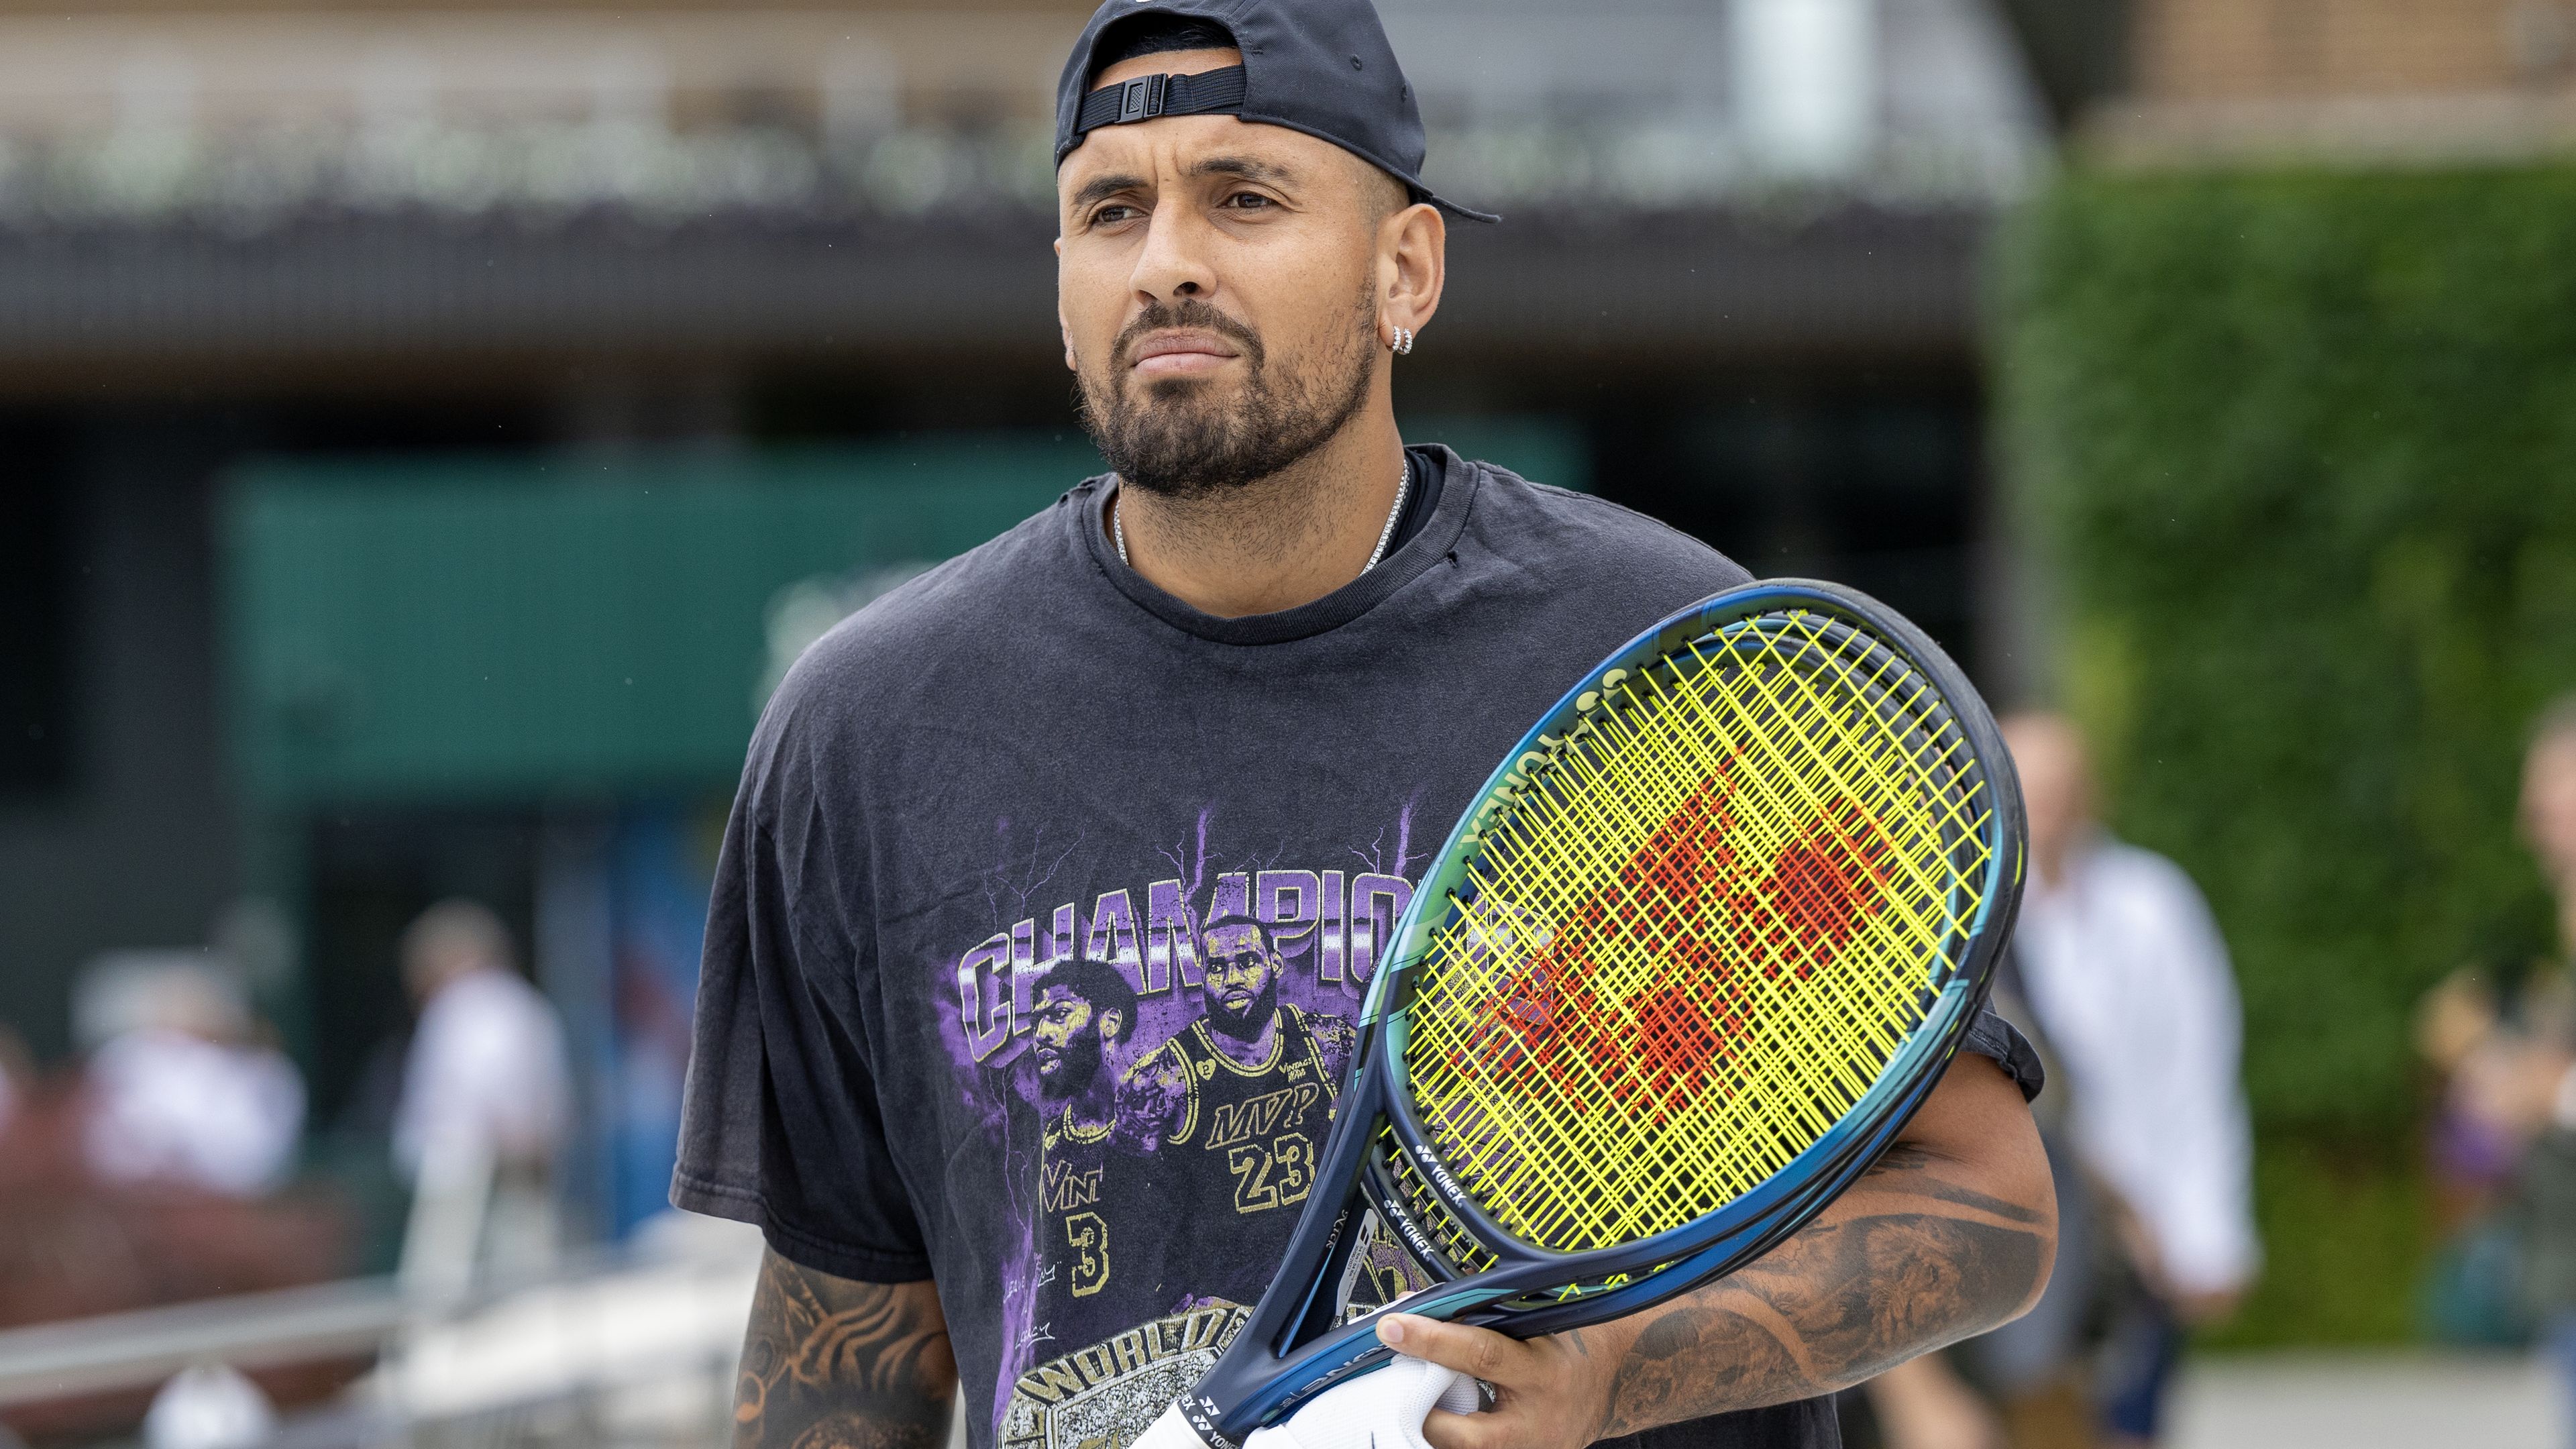 LONDON, ENGLAND - JUNE 30.  Nick Kyrgios of Australia heads for training on the practice courts in preparation for the Wimbledon Lawn Tennis Championships at the All England Lawn Tennis and Croquet Club at Wimbledon on June 30, 2023, in London, England. (Photo by Tim Clayton/Corbis via Getty Images)